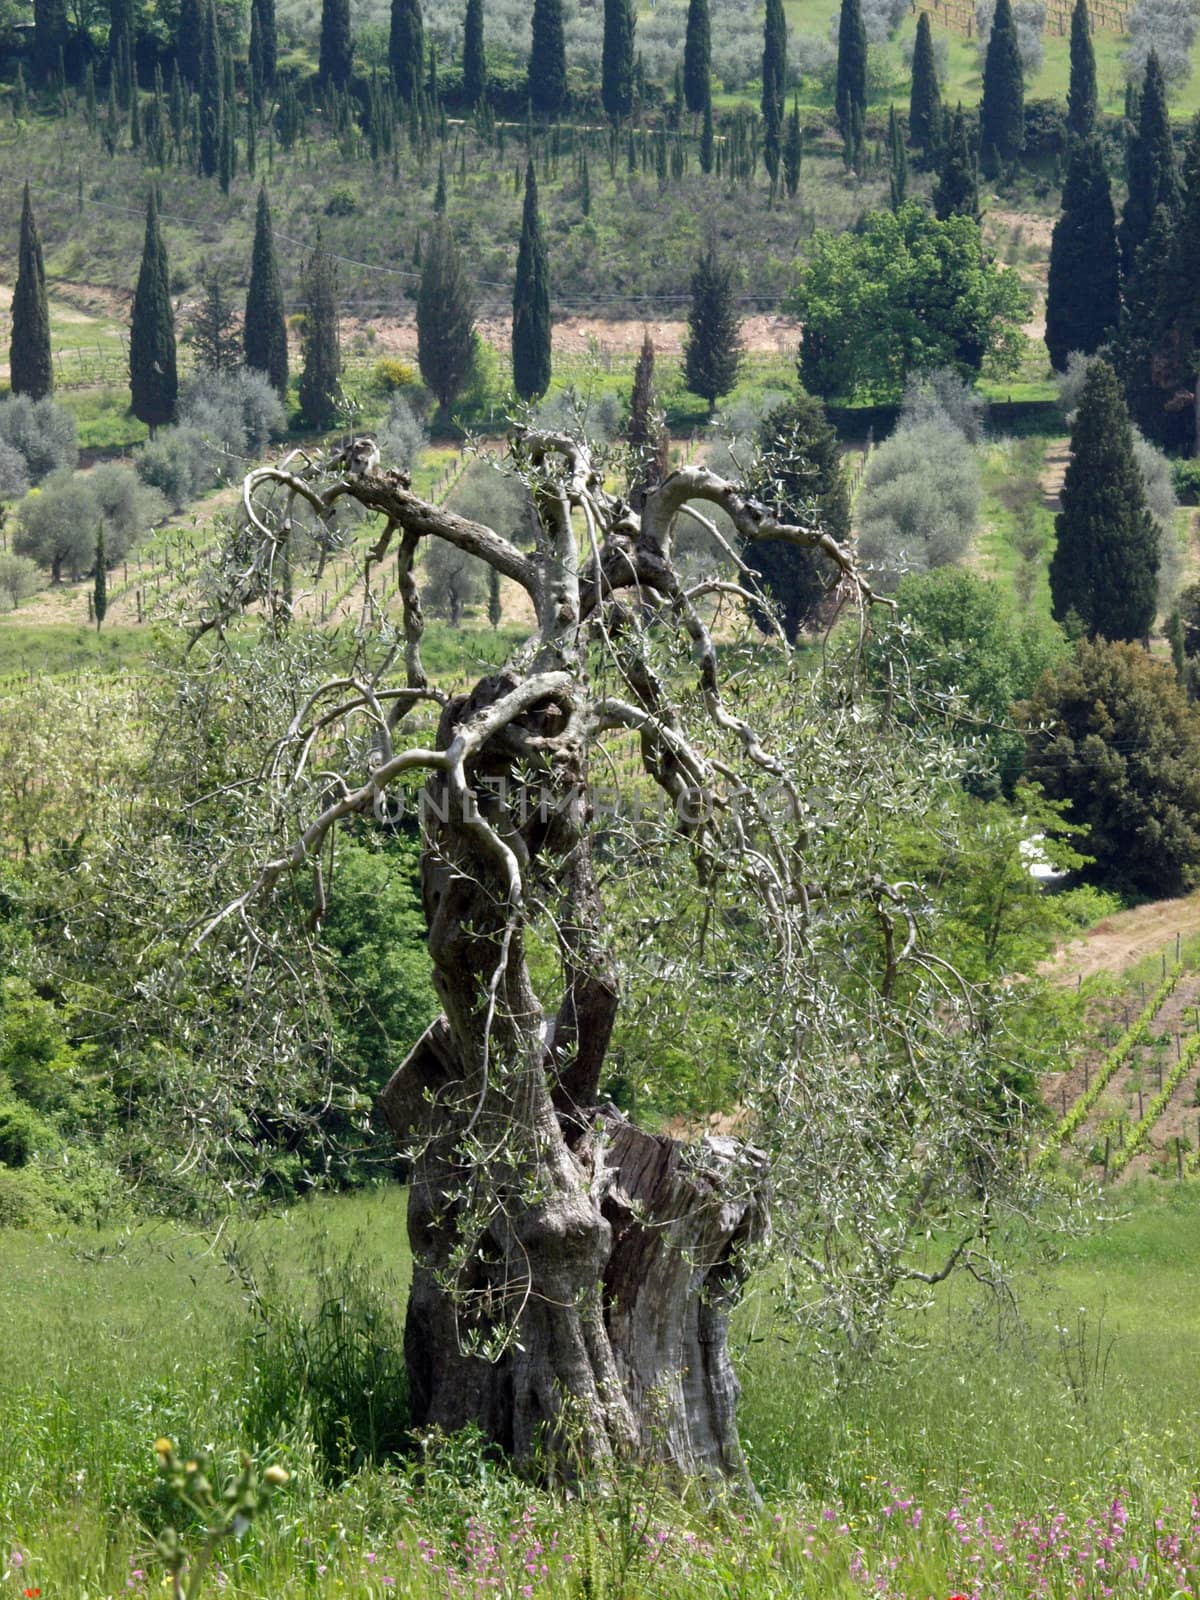 Tuscan landscape with vineyards, olive trees and cypresses